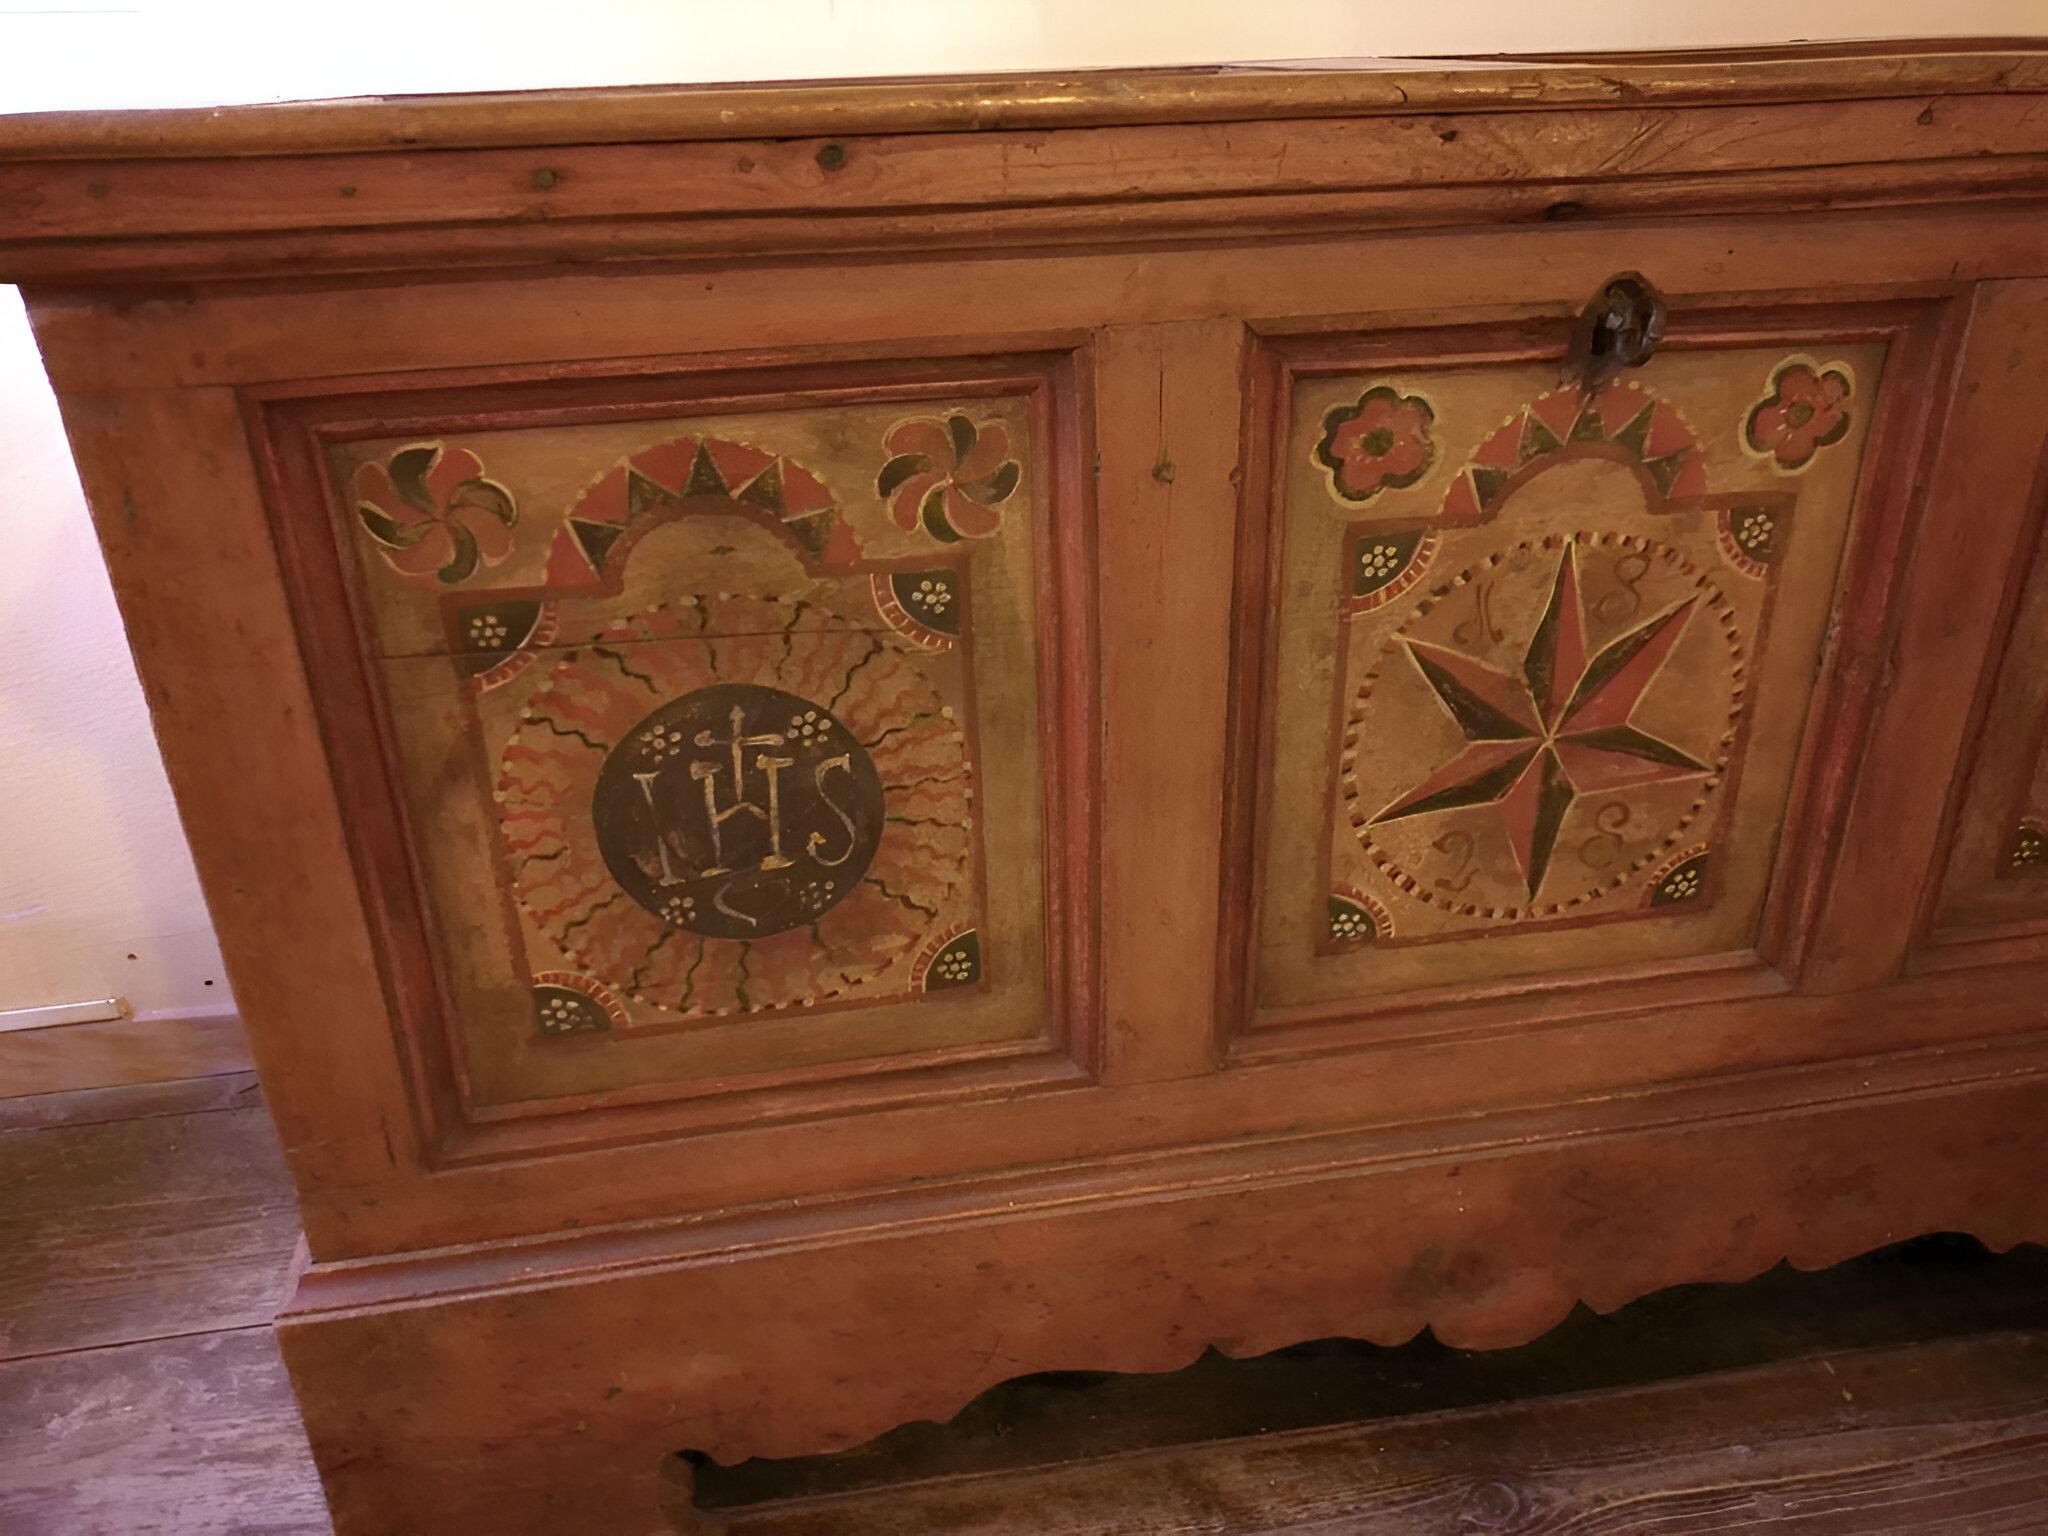 Fir wedding chest, folk art. Origin South Tyrol, Italy.
Dated 1828, interlocking base.
Original hardware with interior with drawer and glove box.
conservation restoration.
Good state of conservation.
Reference measurements at the frame.
More